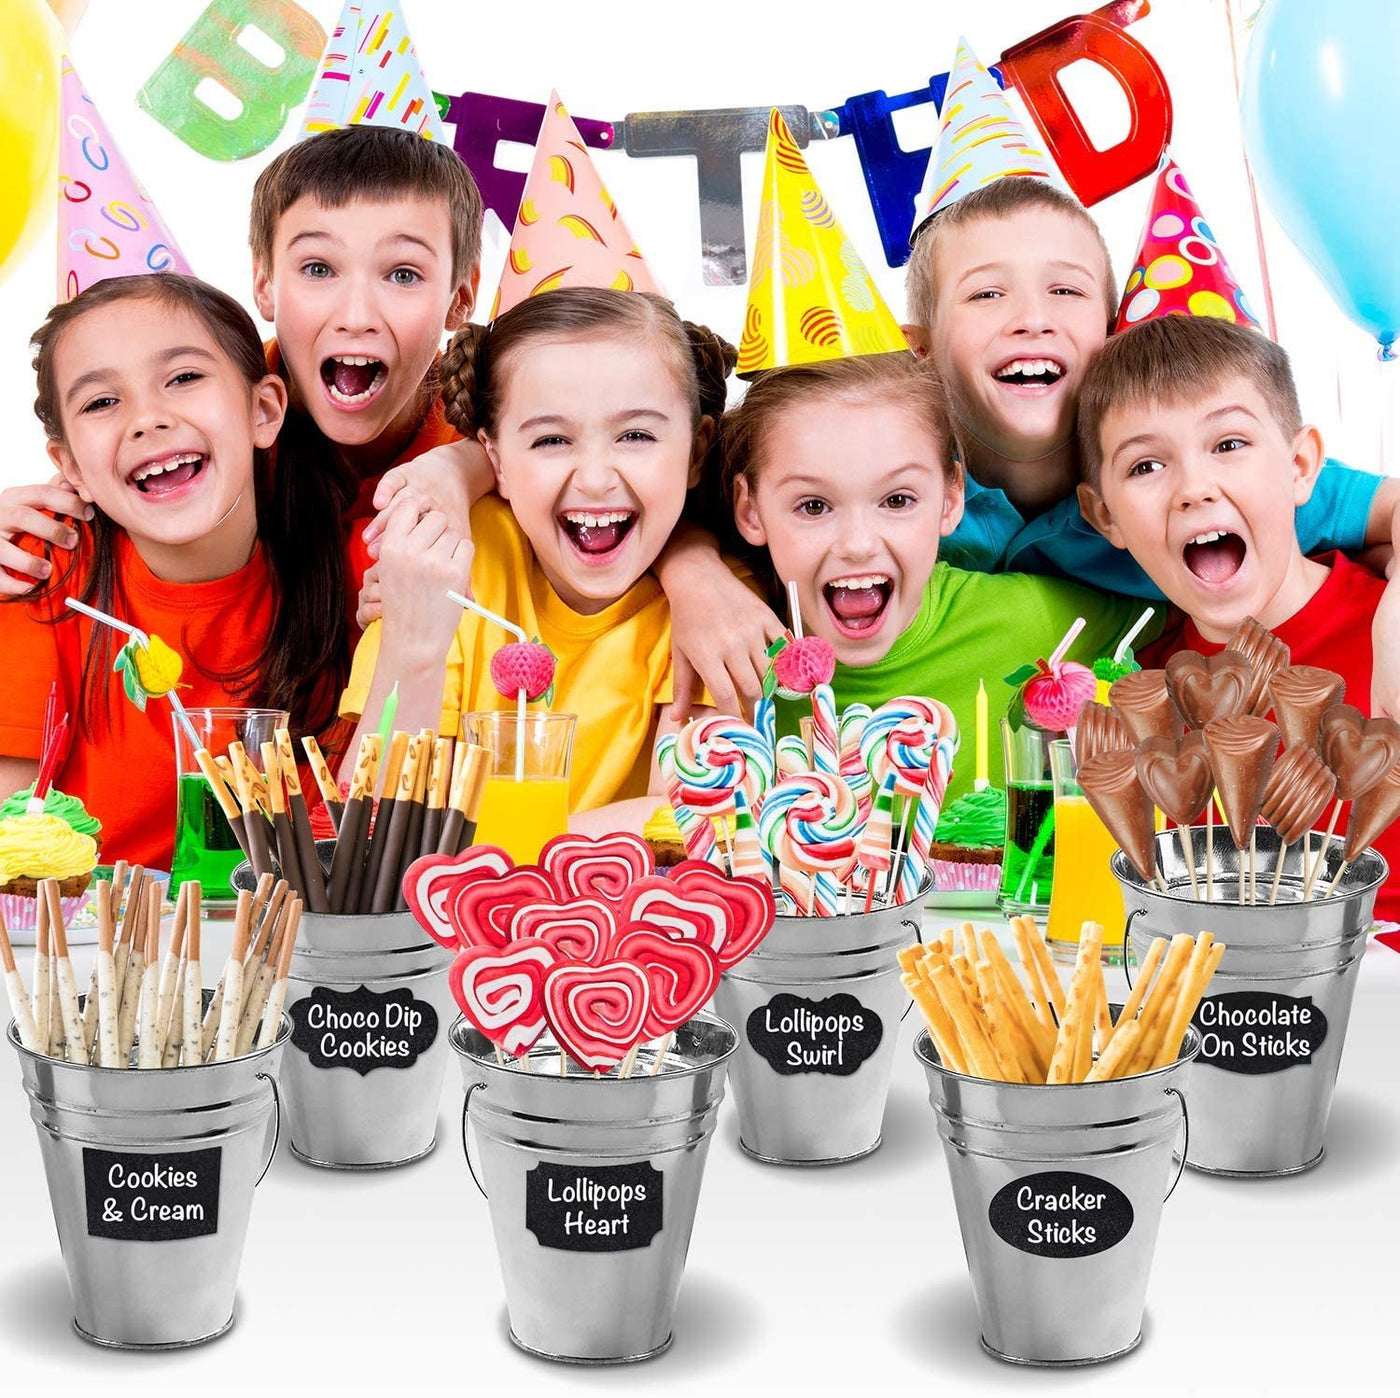 Large Galvanized Metal Buckets Set, Includes 12 Rustic Pails with Handles, 24 Chalkboard Labels and 1 Liquid Chalk Marker, 5" Galvanized Buckets for Party Favors, Wedding Decorations